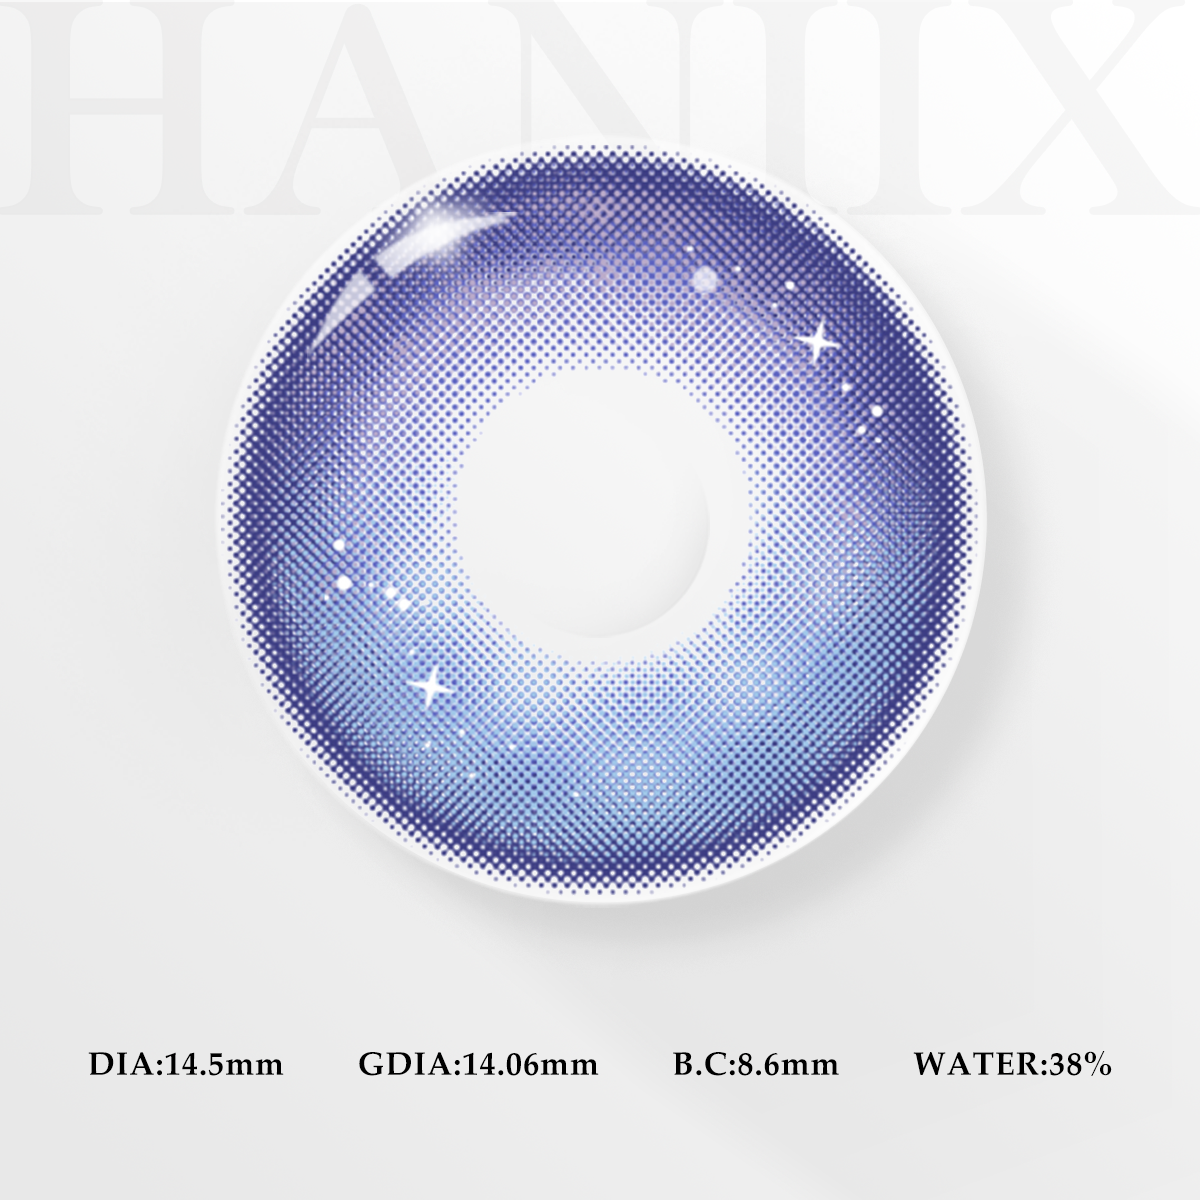 Genshin Galaxy Blue Violet - Yearly, 2 lenses